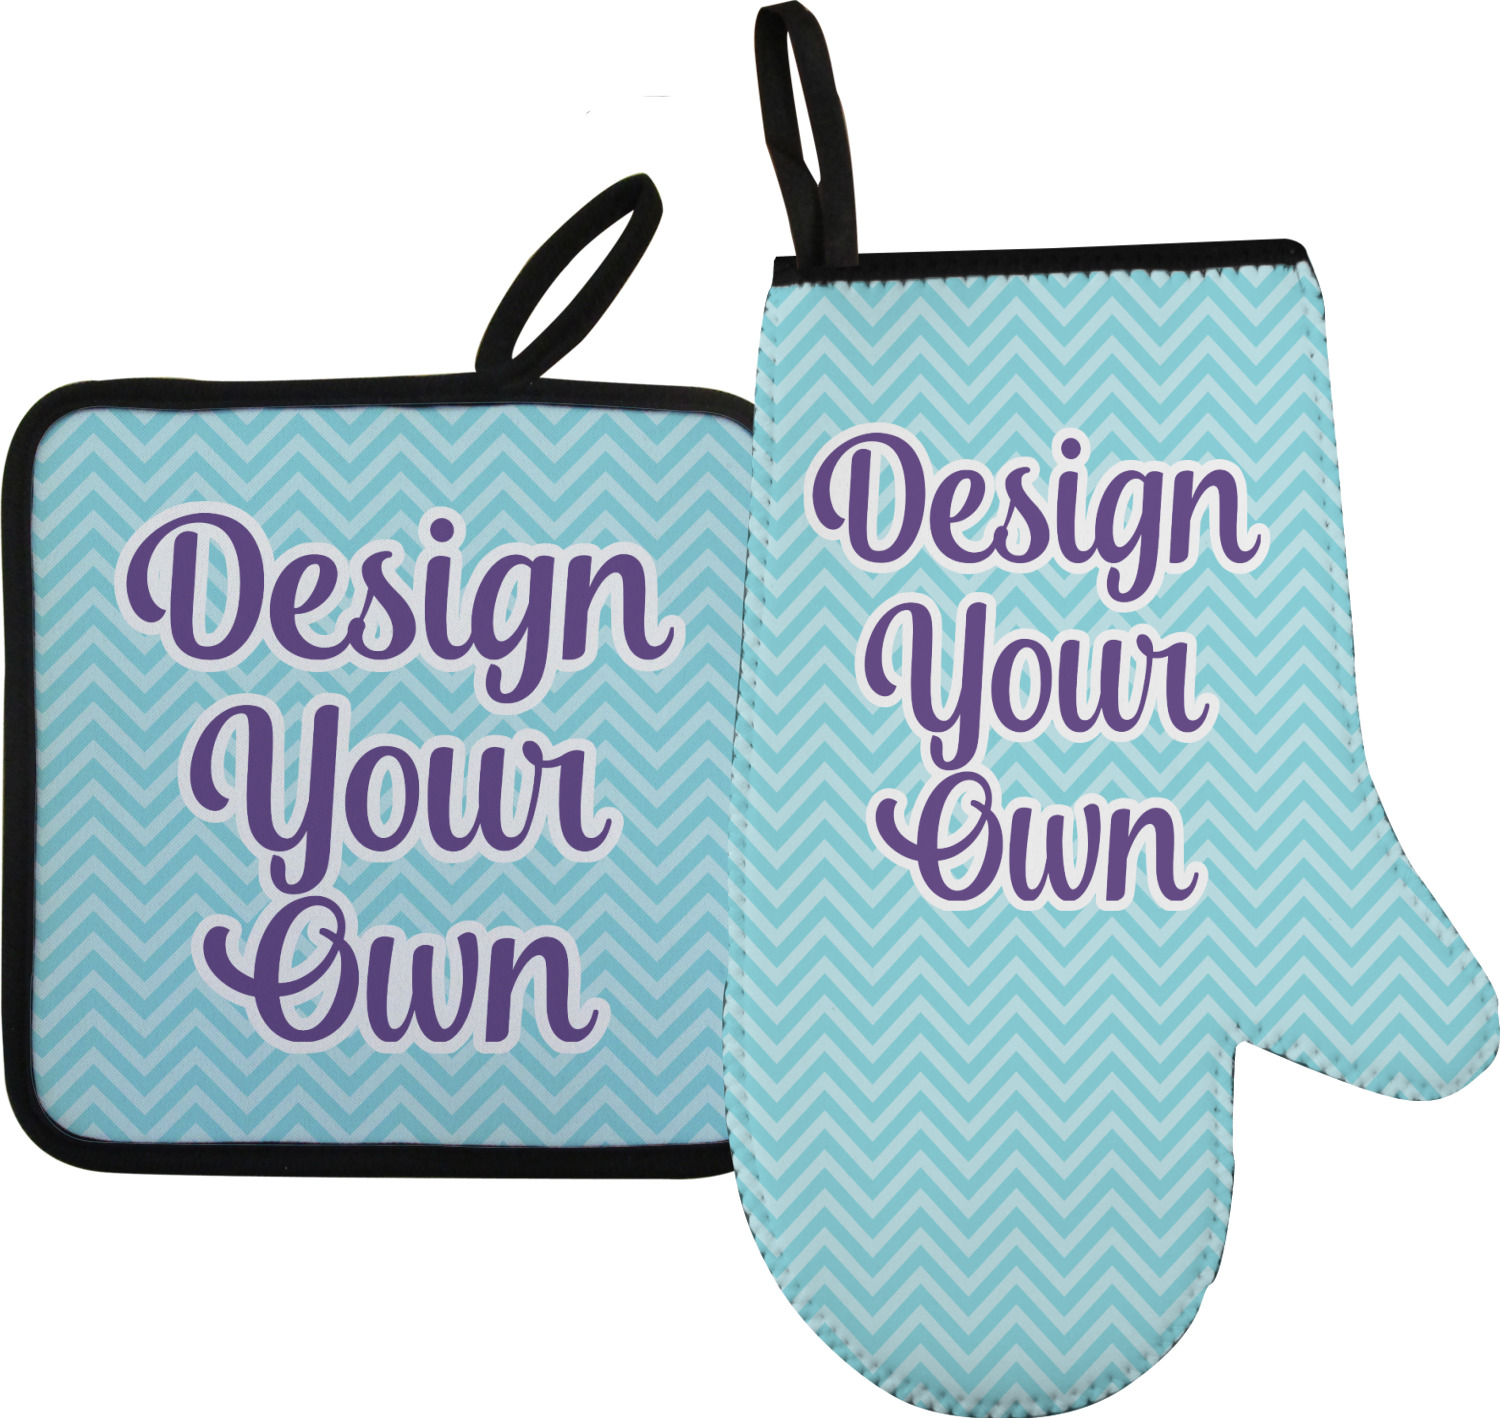 Personalized Oven Mitt and Pot Holder Set | Personalized Oven mitt |  Personalized Pot Holder | Personalized Kitchen Gifts | Housewarming,  Wedding Gift